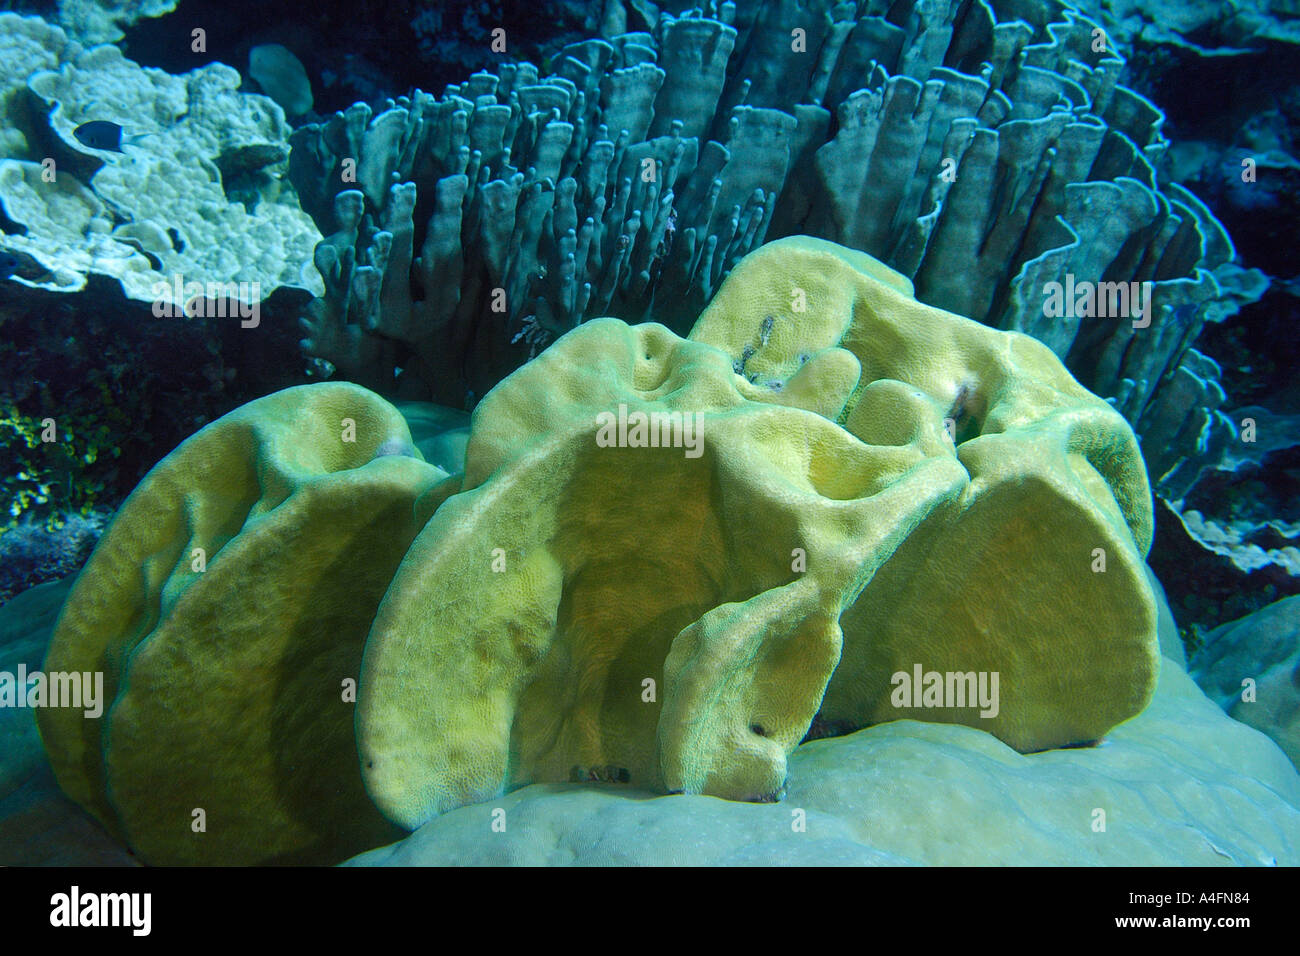 Plate coral Pavona minuta and Blue coral Heliopora coerulea in the backgound Namu atoll Marshall Islands N Pacific Stock Photo